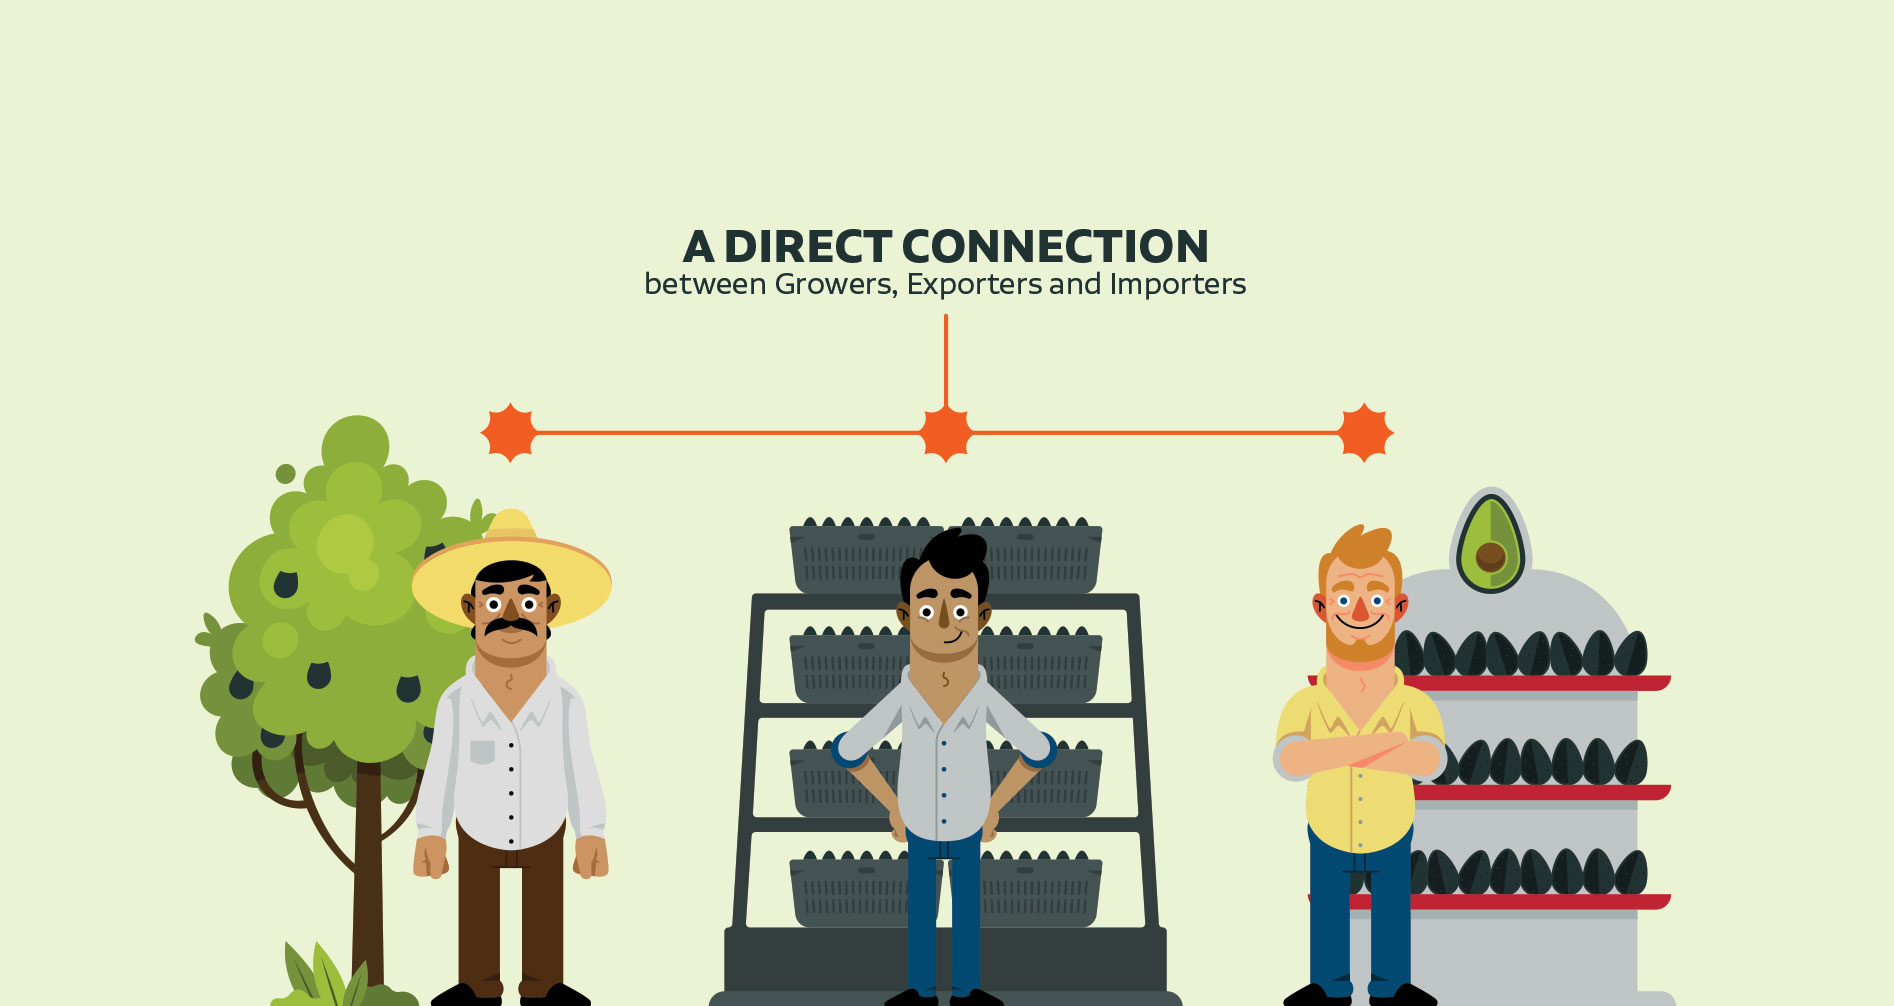 A Direct connection between Growers, Exporters and Importers